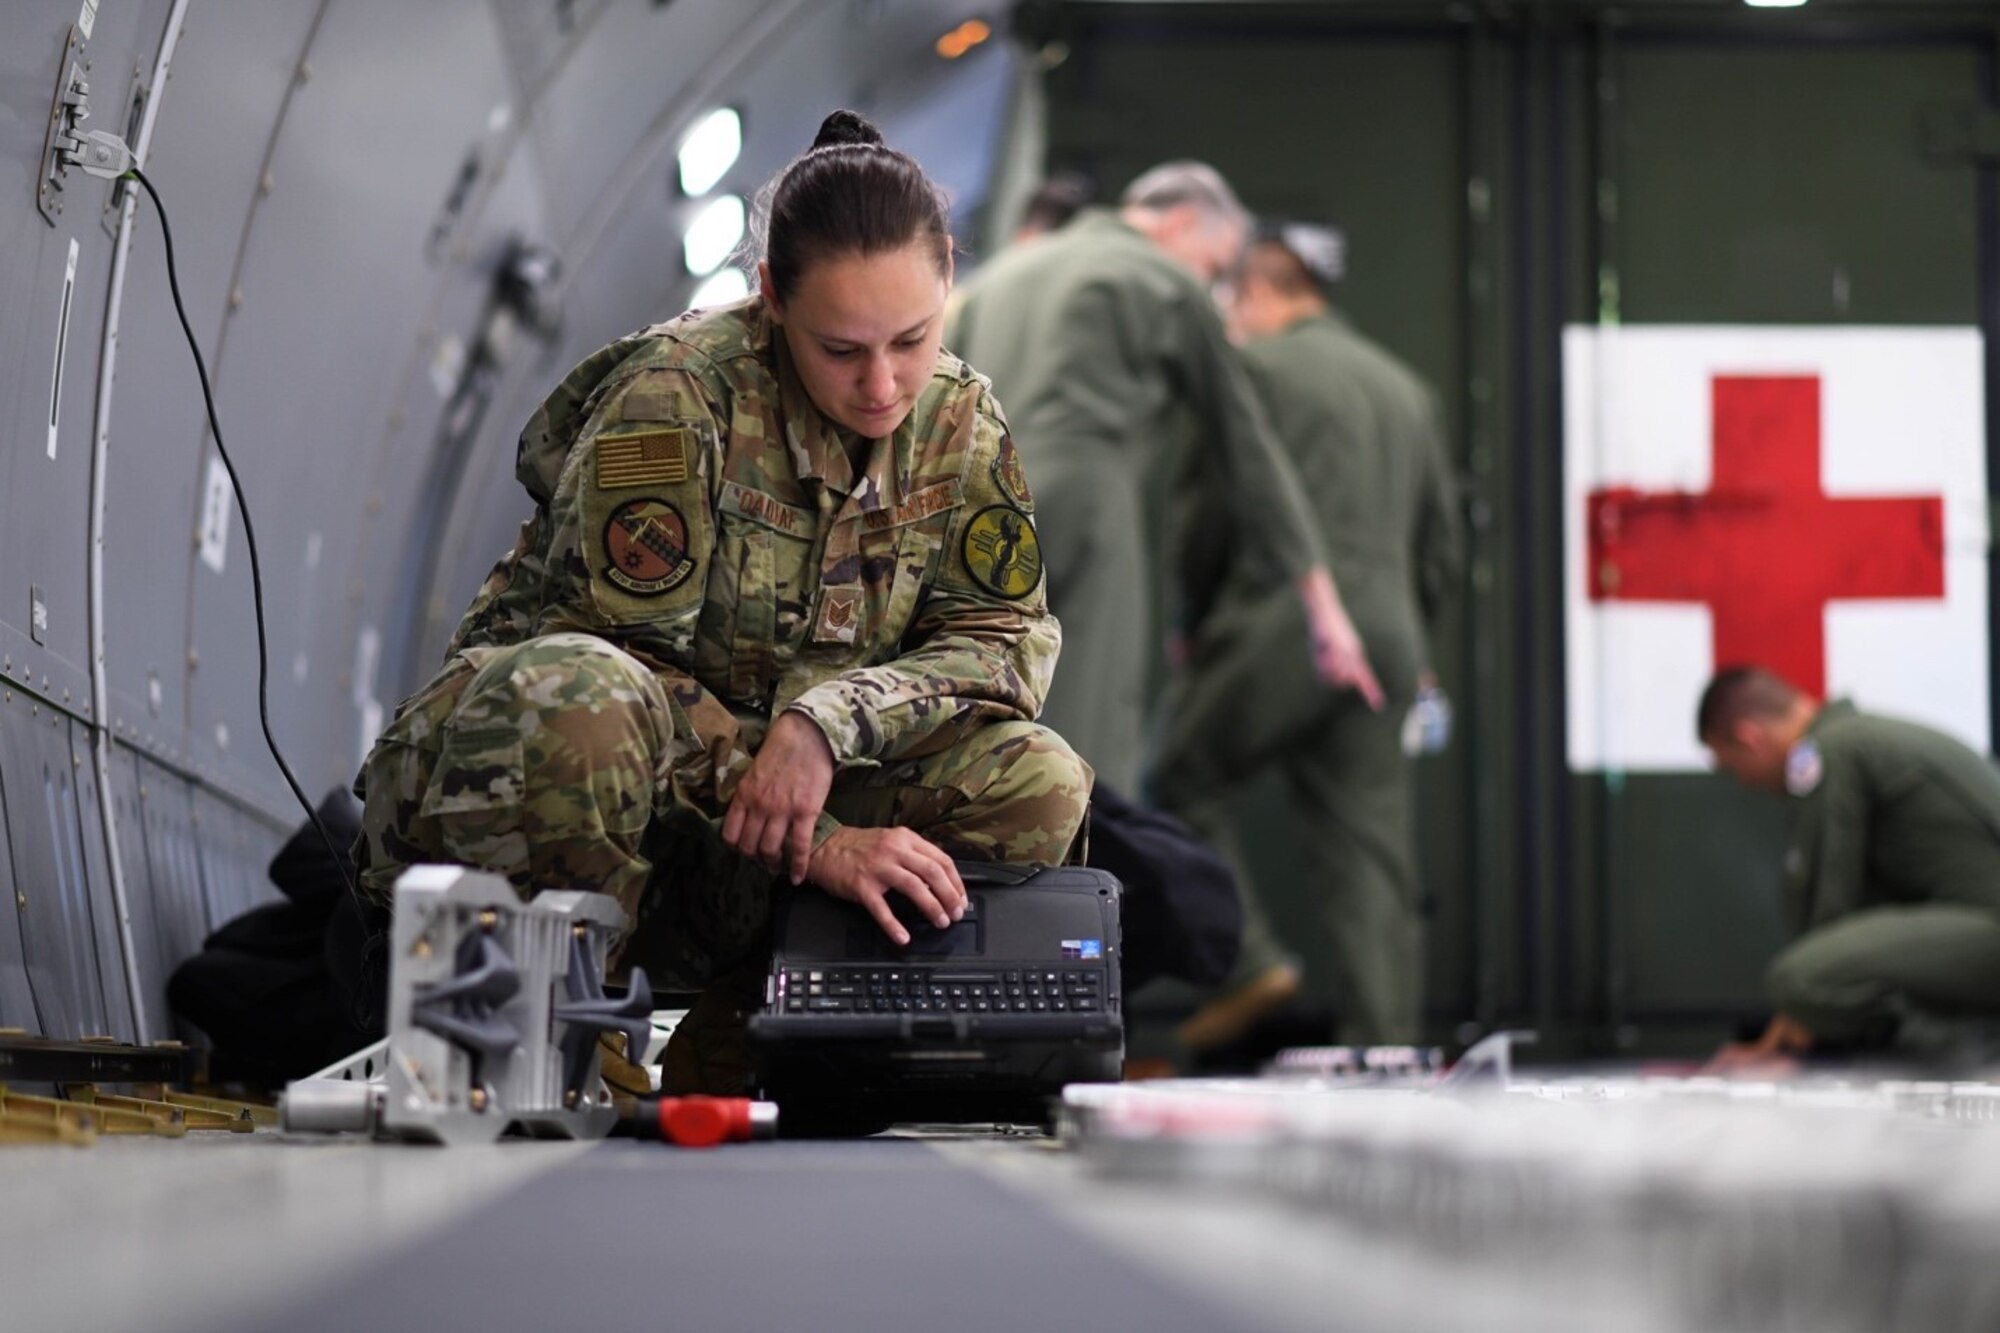 Tech. Sgt. Leah Oakleaf, 931st Aircraft Maintenance Squadron crew chief assigned to McConnell Air Force Base, Kansas reviews her technical order for configuration plans of the fuselage cargo palette locks July 11, 2020 at Travis Air Force Base, California. Rapid response from vendors to create quality replacement for parts such as cargo locks and outlets played a key role in resolving deficiencies that previously withheld the KC-46A Pegasus from operating as an aeromedical evacuation aircraft.  (U.S. Air Force photo by Airman 1st Class Nilsa Garcia)